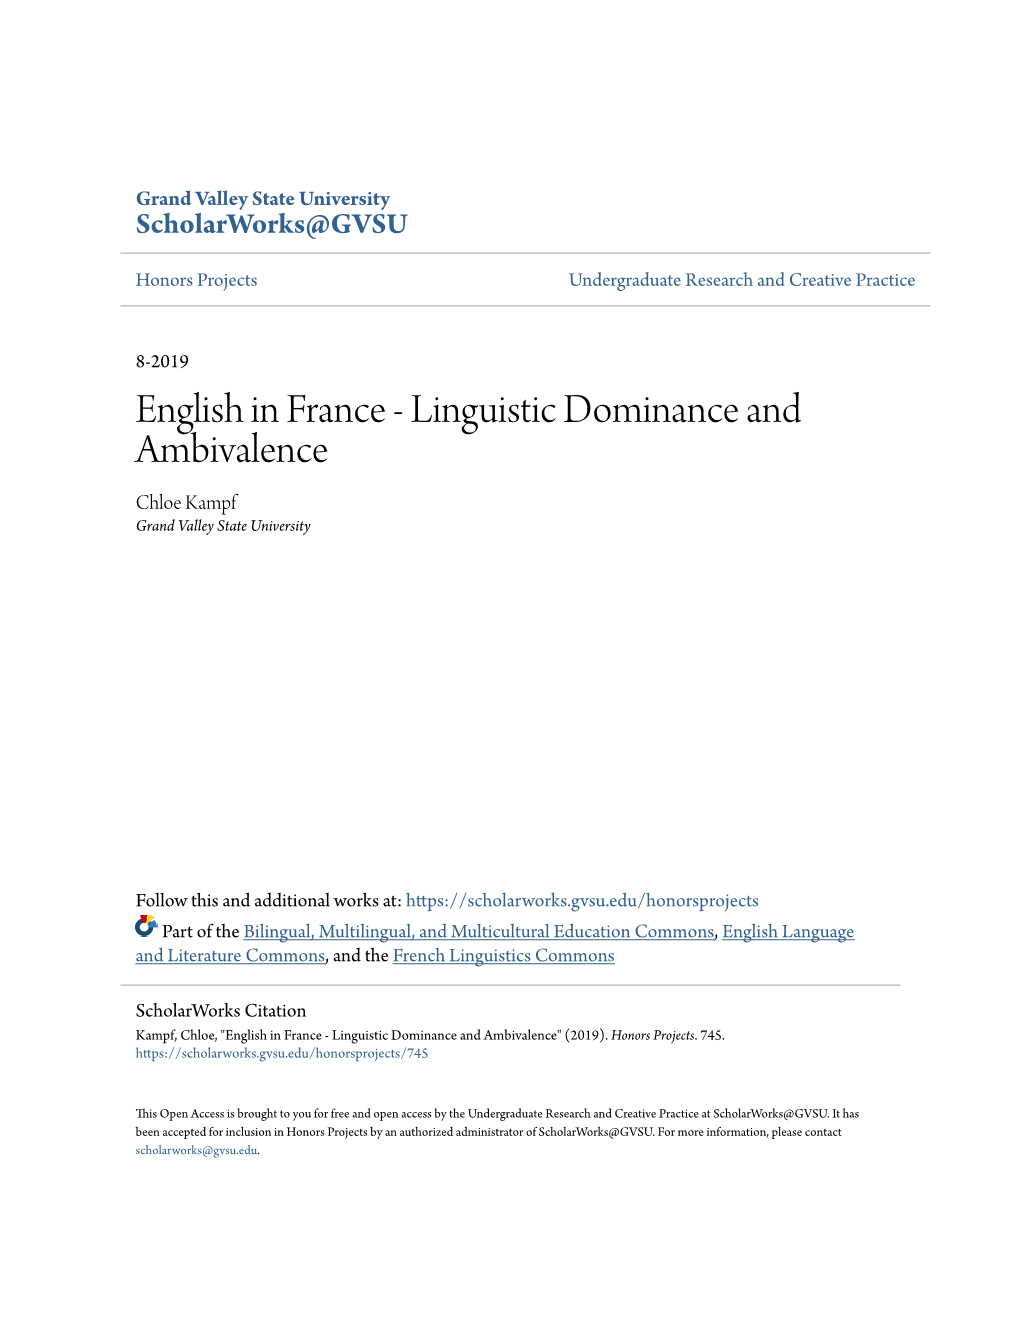 English in France - Linguistic Dominance and Ambivalence Chloe Kampf Grand Valley State University